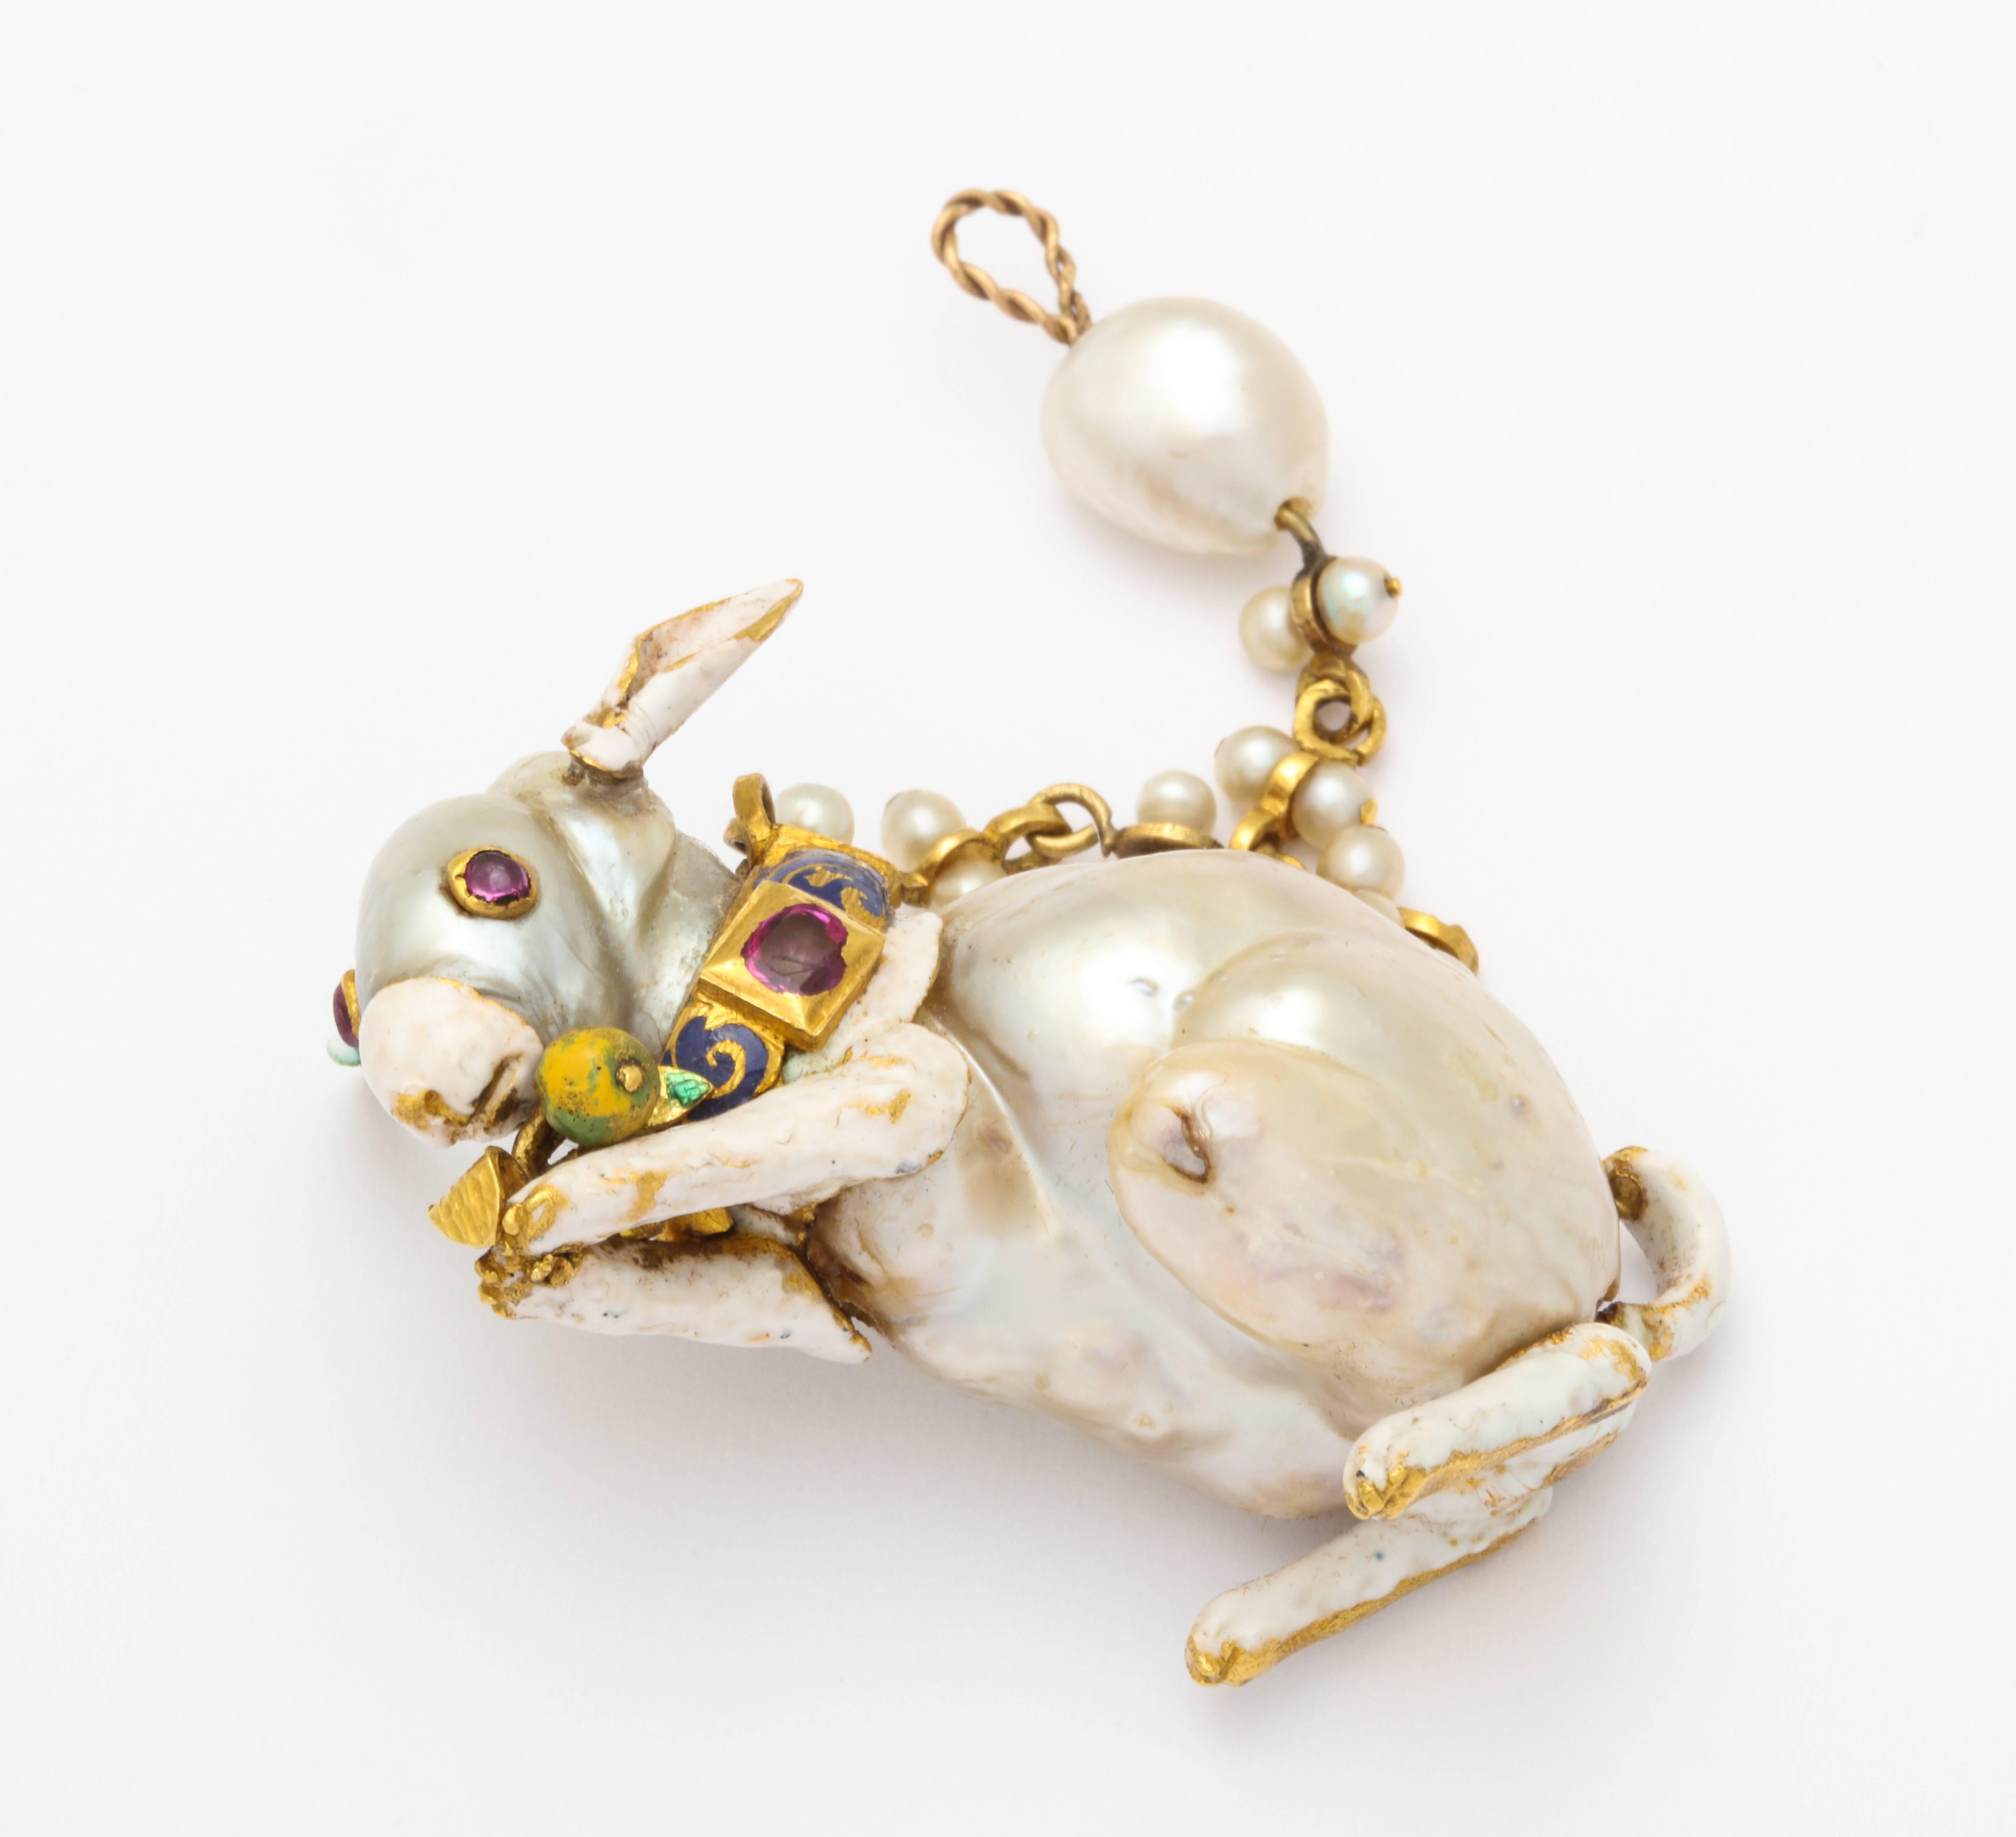 Natural Pearl Renaissance Revival Enamel Gold Rabbit Pendant Brooch

A very creative and unique natural baroque pearl set as the body of rabbit. Designed with multi color enamel  and rubies.

European Make. Circa 1850

Depicted in full page spread